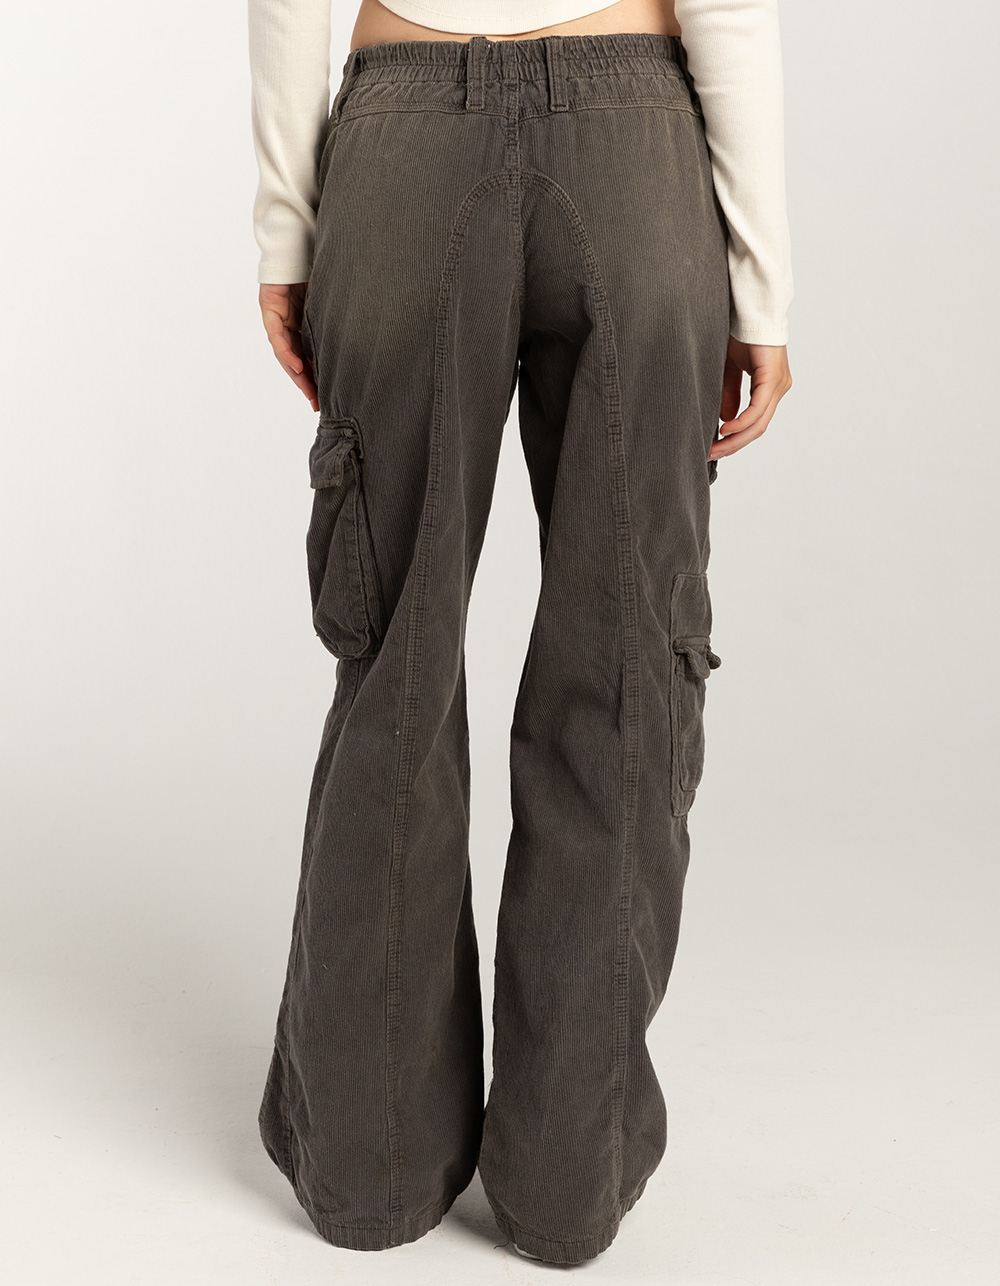 Womens Tillys Rise - Corduroy Y2K Mid BDG CHARCOAL | Urban Outfitters Pants Cargo